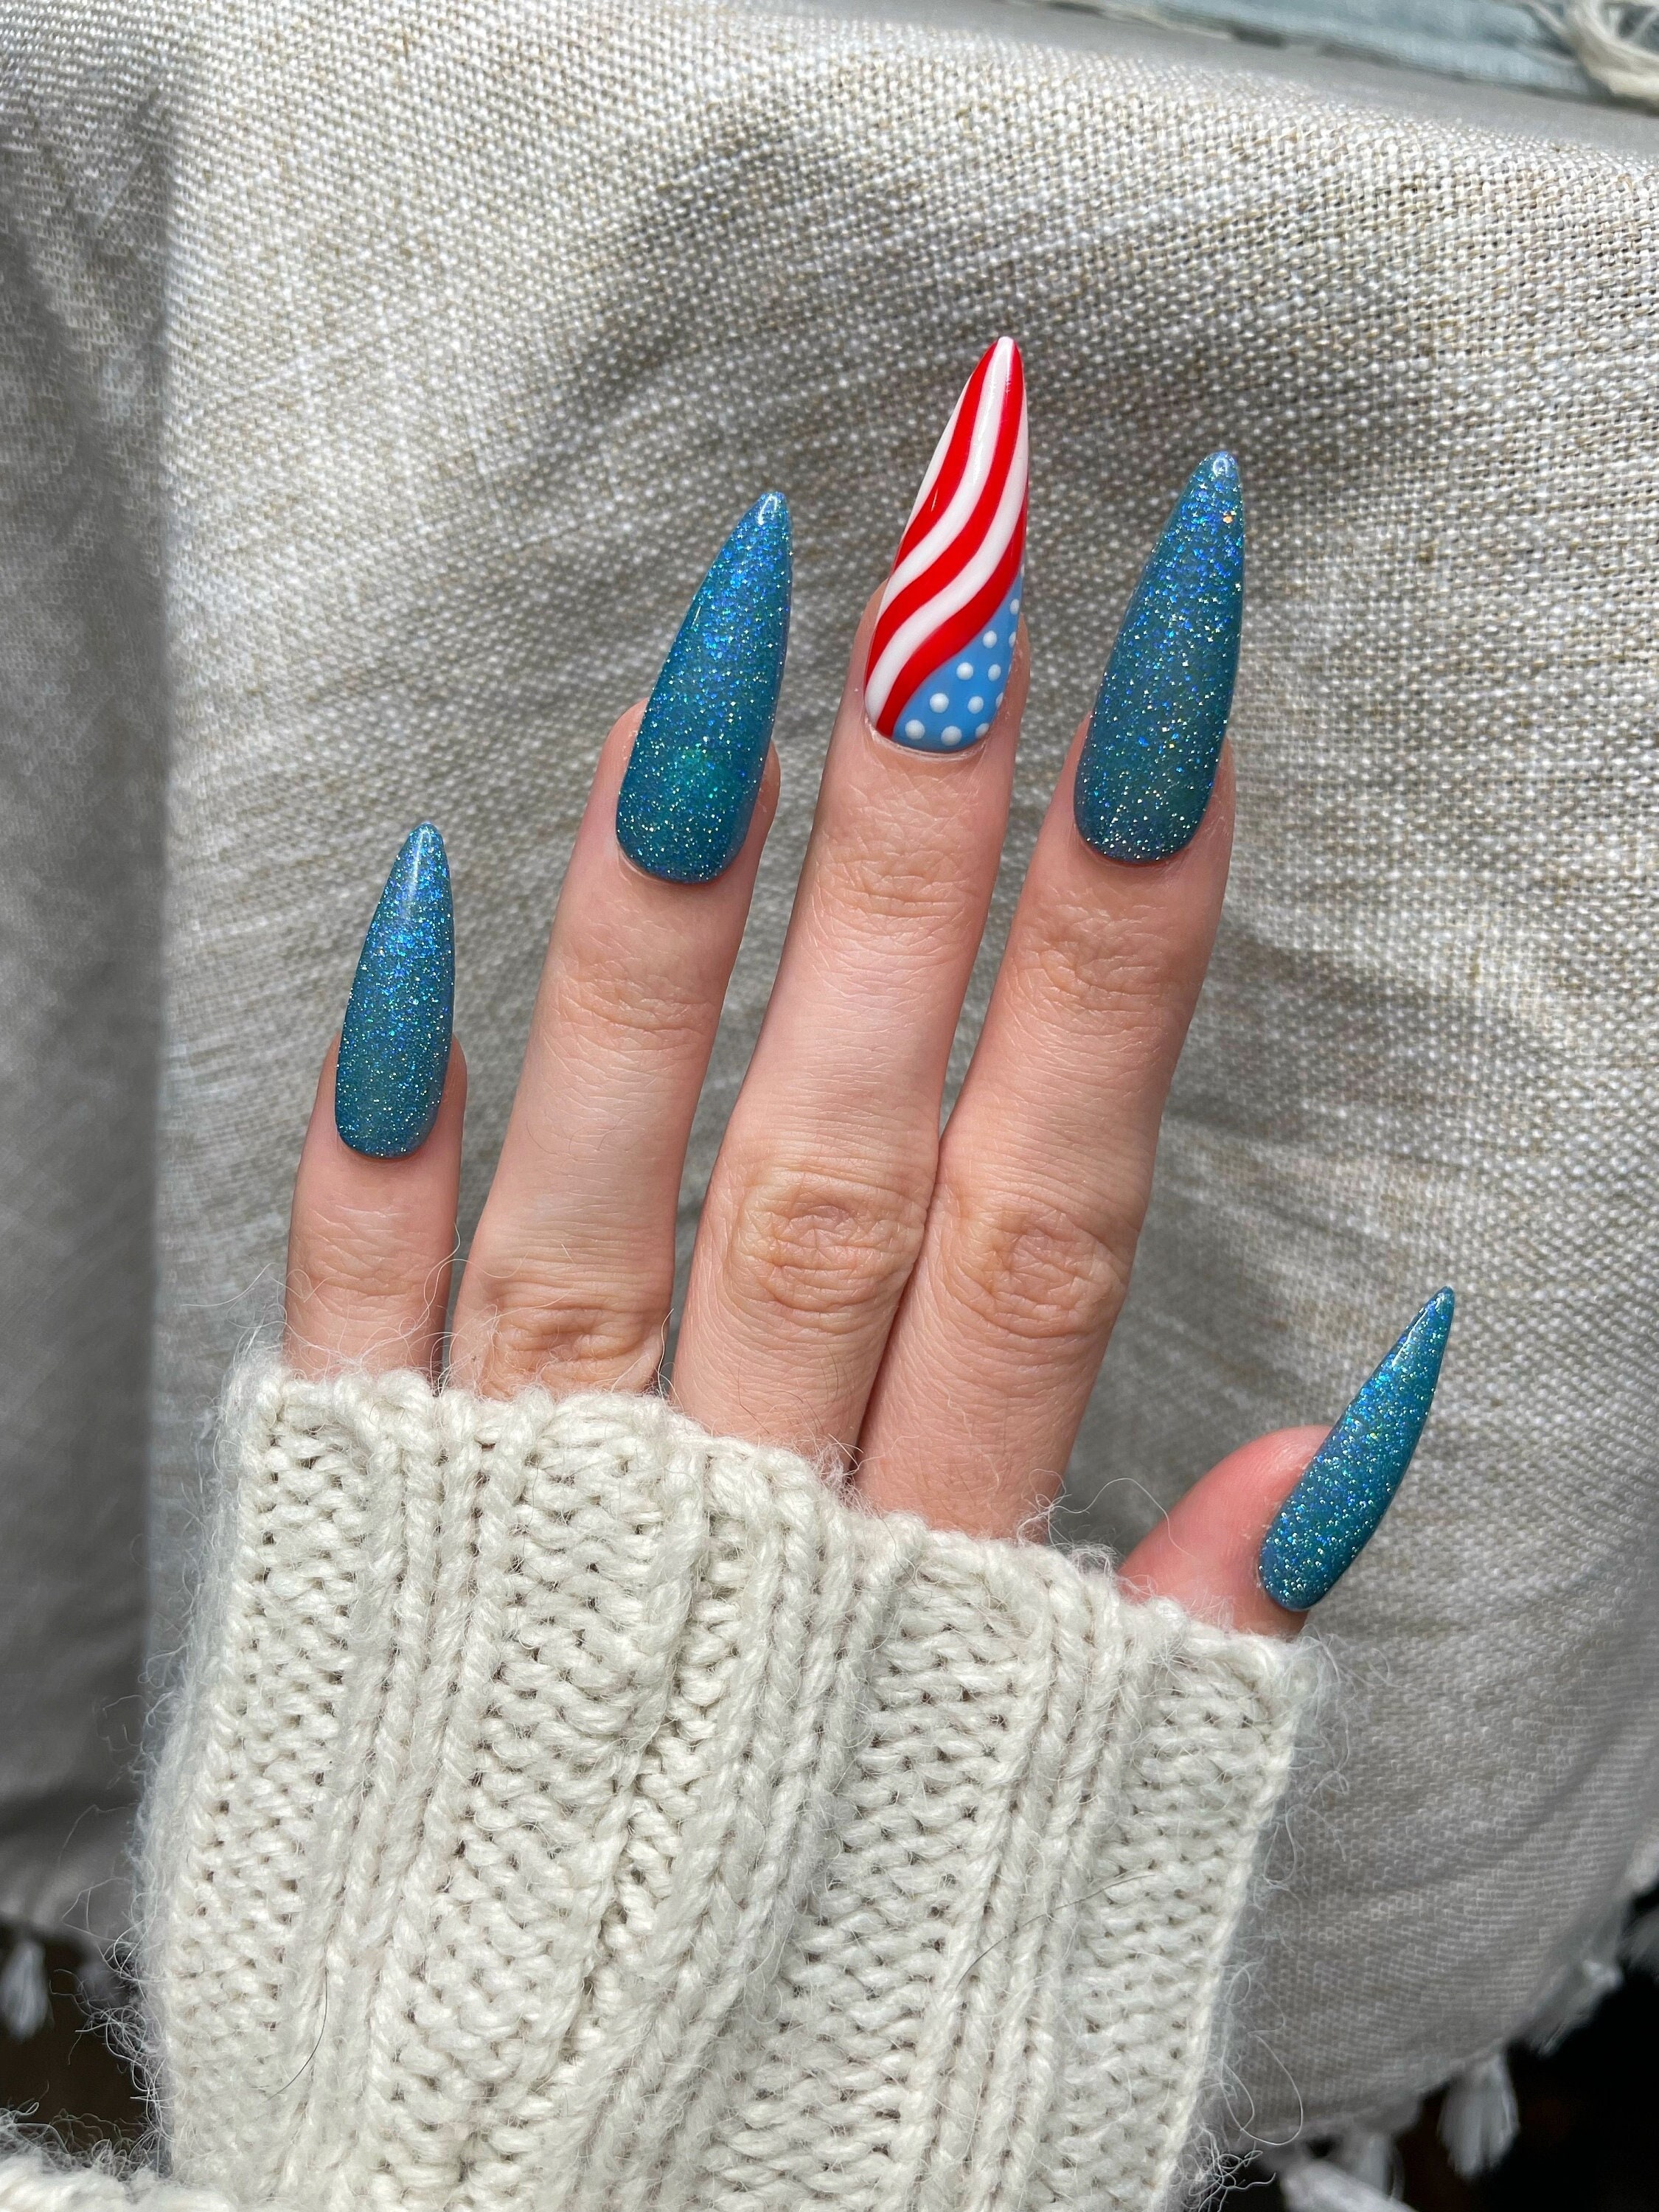 4th of July Nail Art Designs for 2018 - 18 Ideas for July 4th Nails